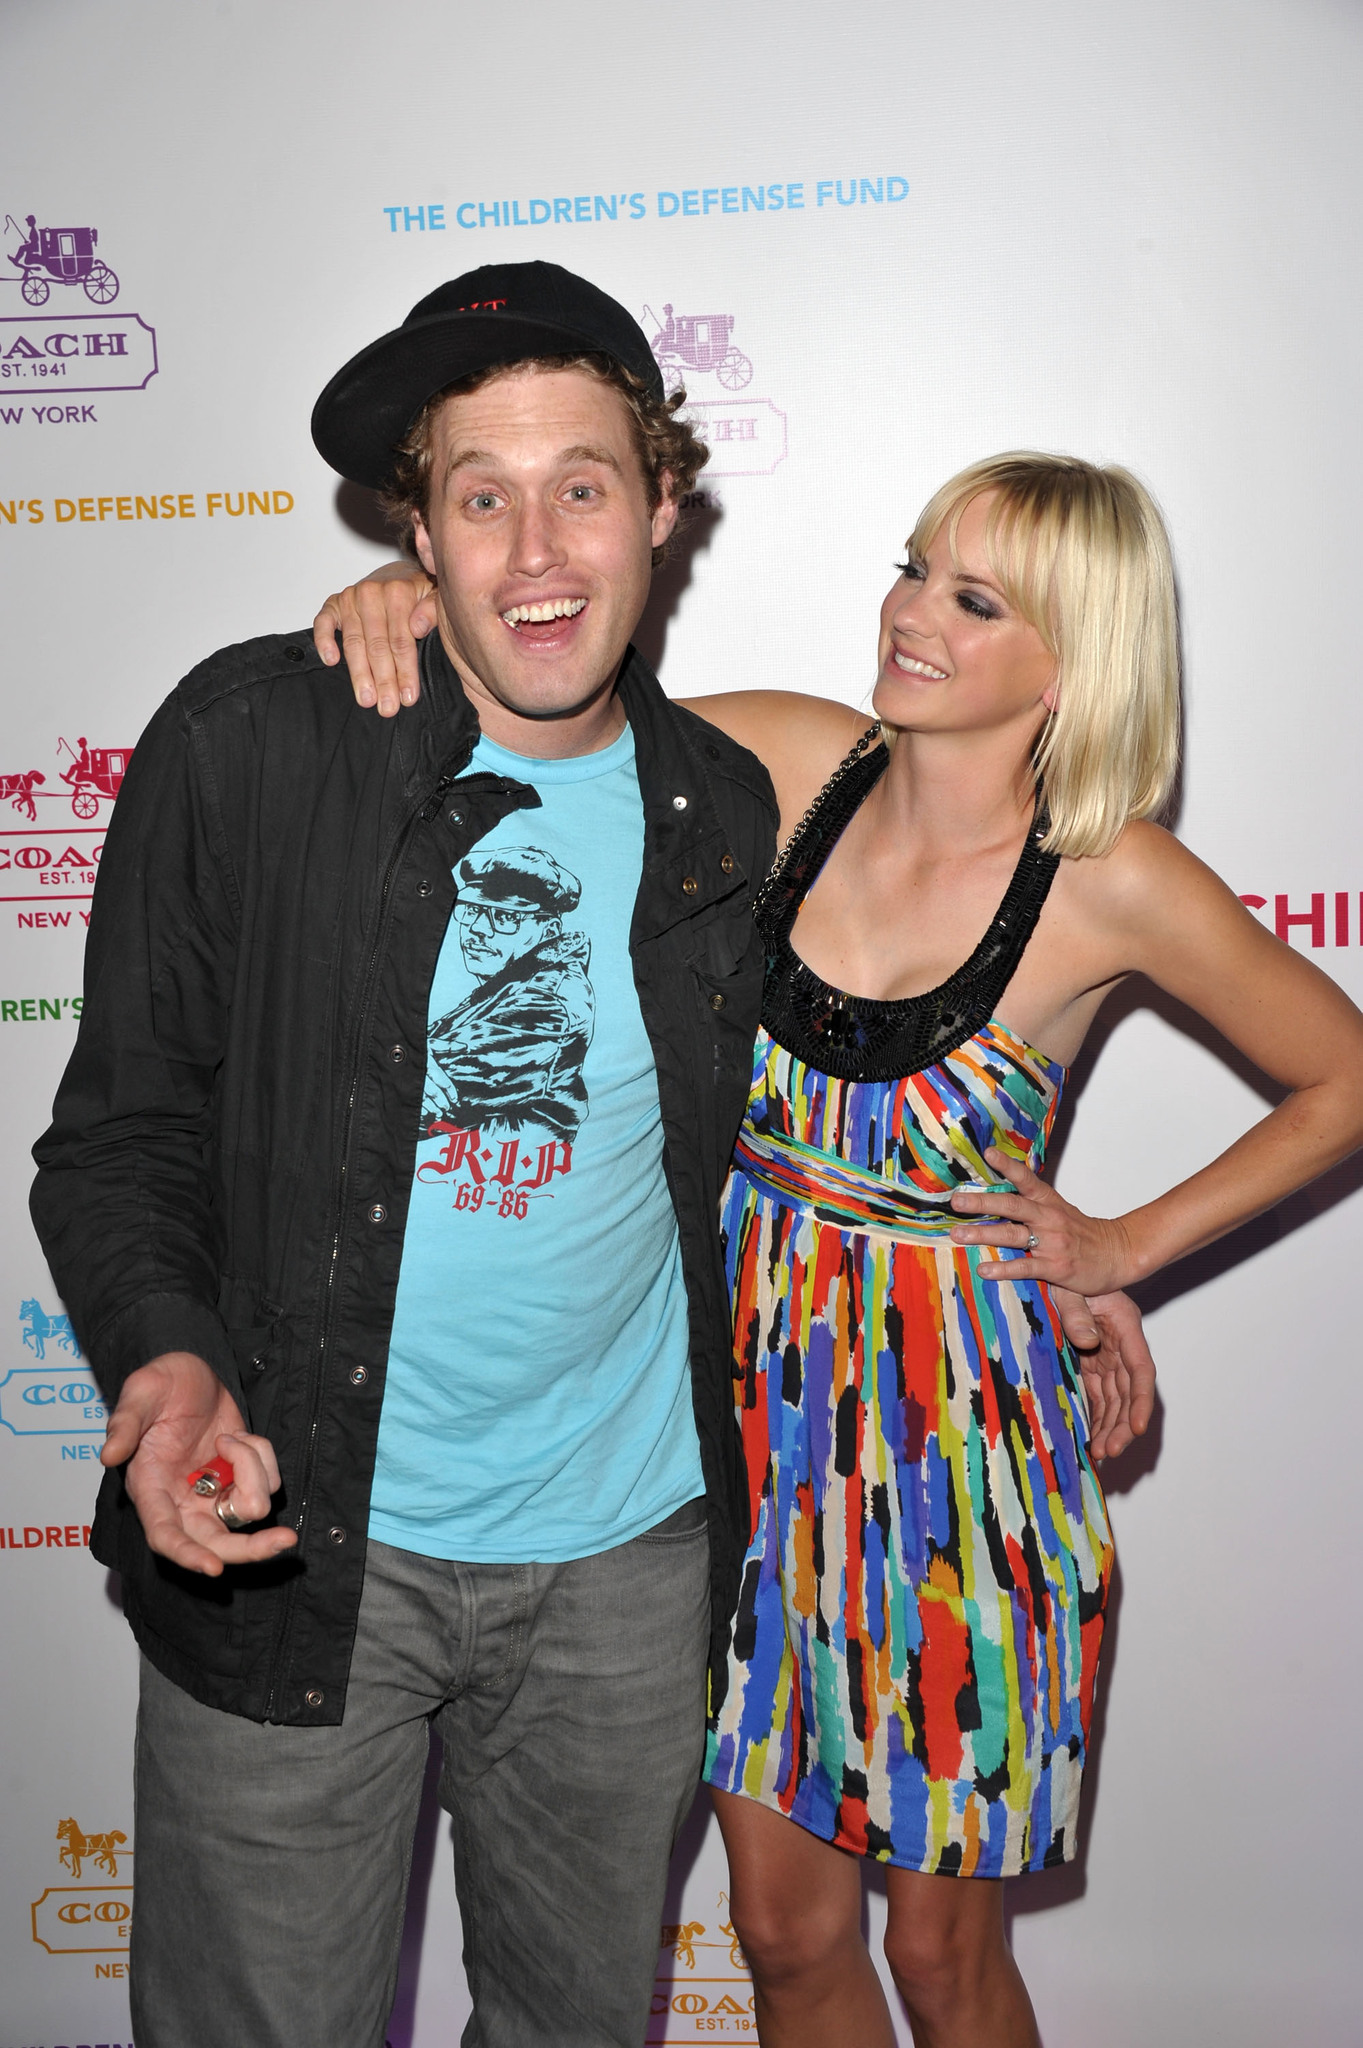 Anna Faris and T.J. Miller